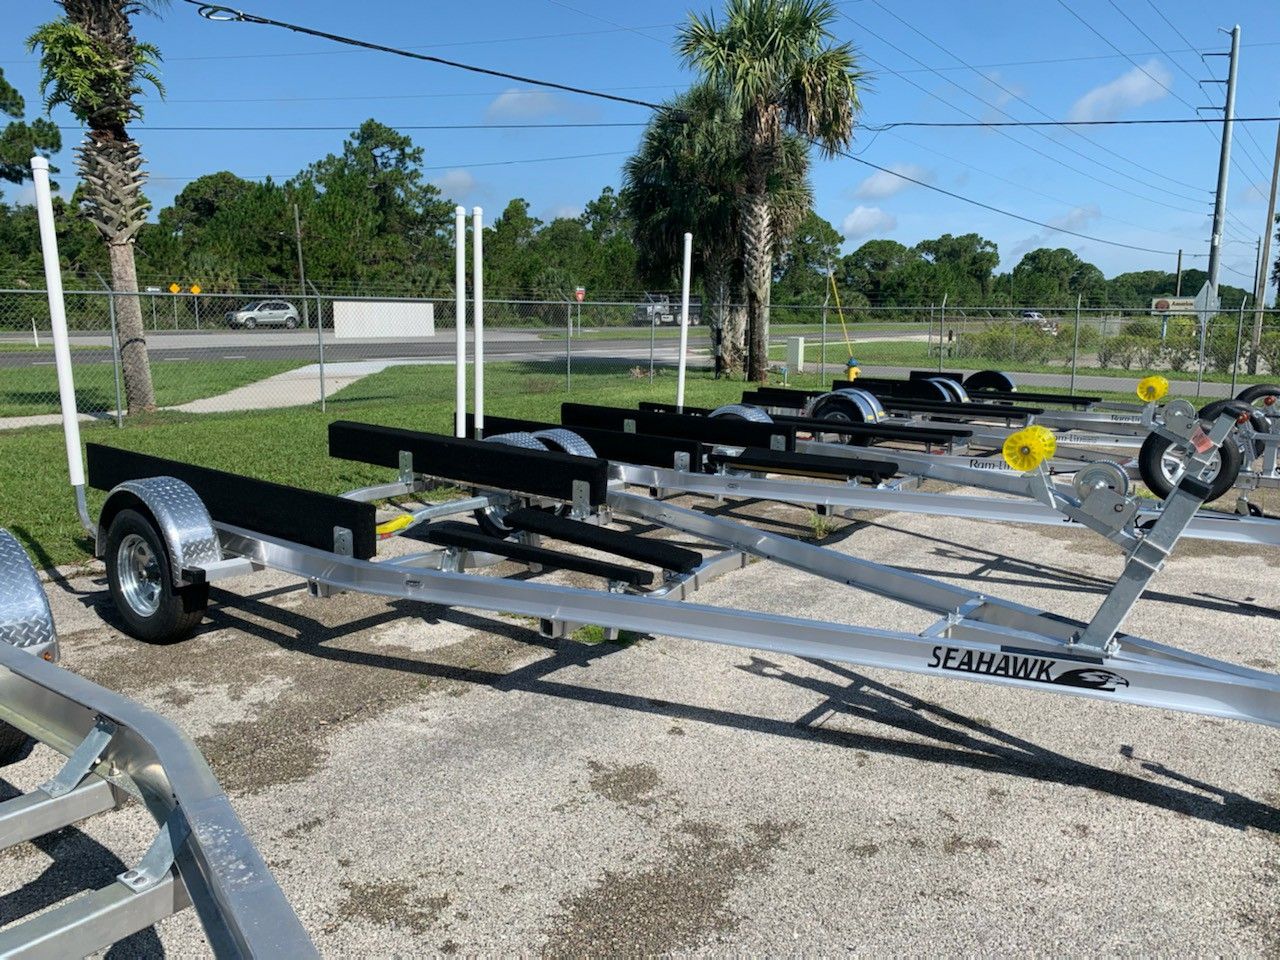 Brand new seahawk aluminum trailer fits 17' to 19'